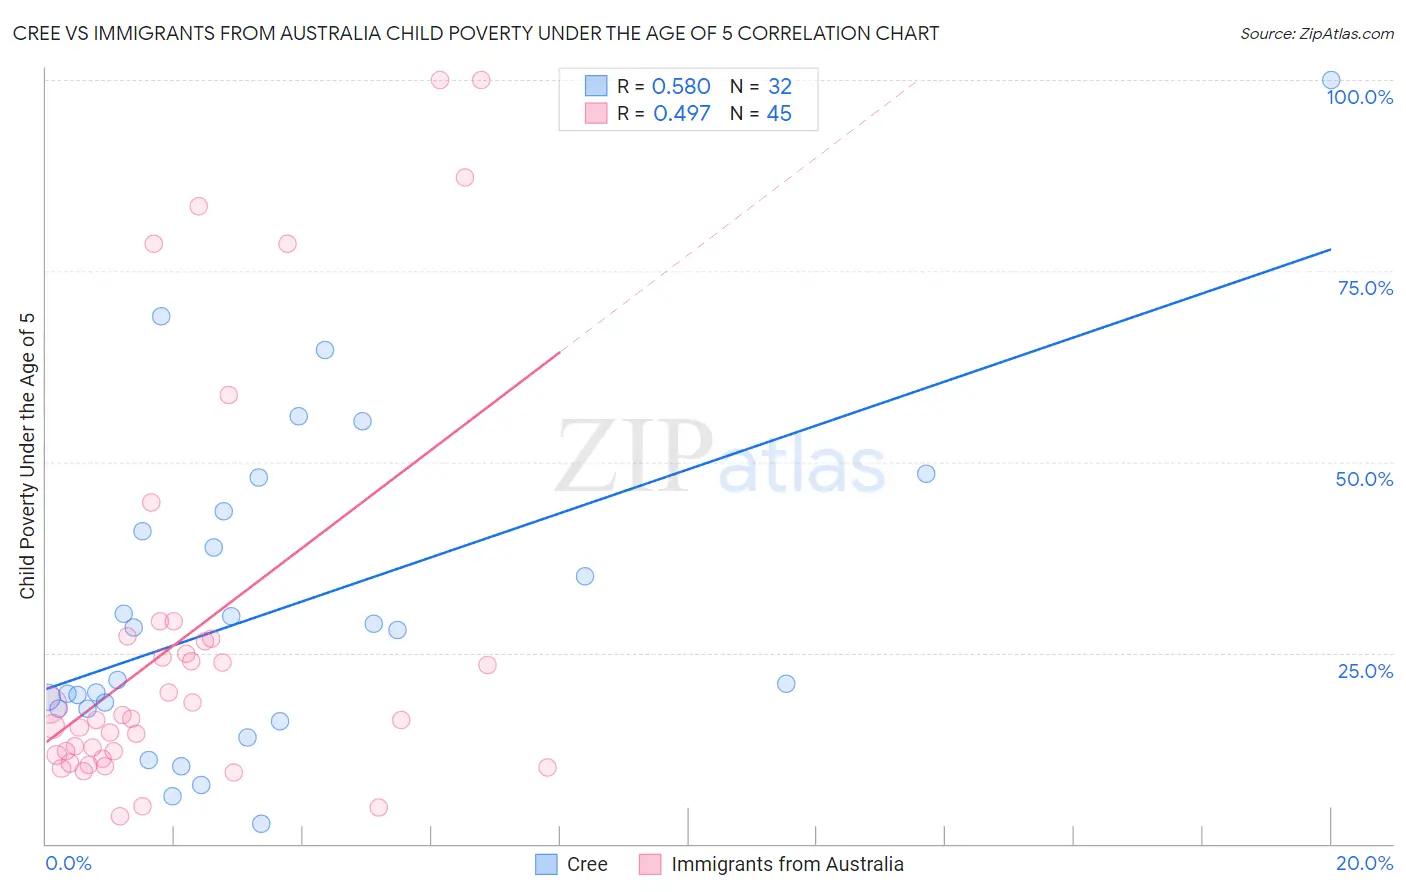 Cree vs Immigrants from Australia Child Poverty Under the Age of 5